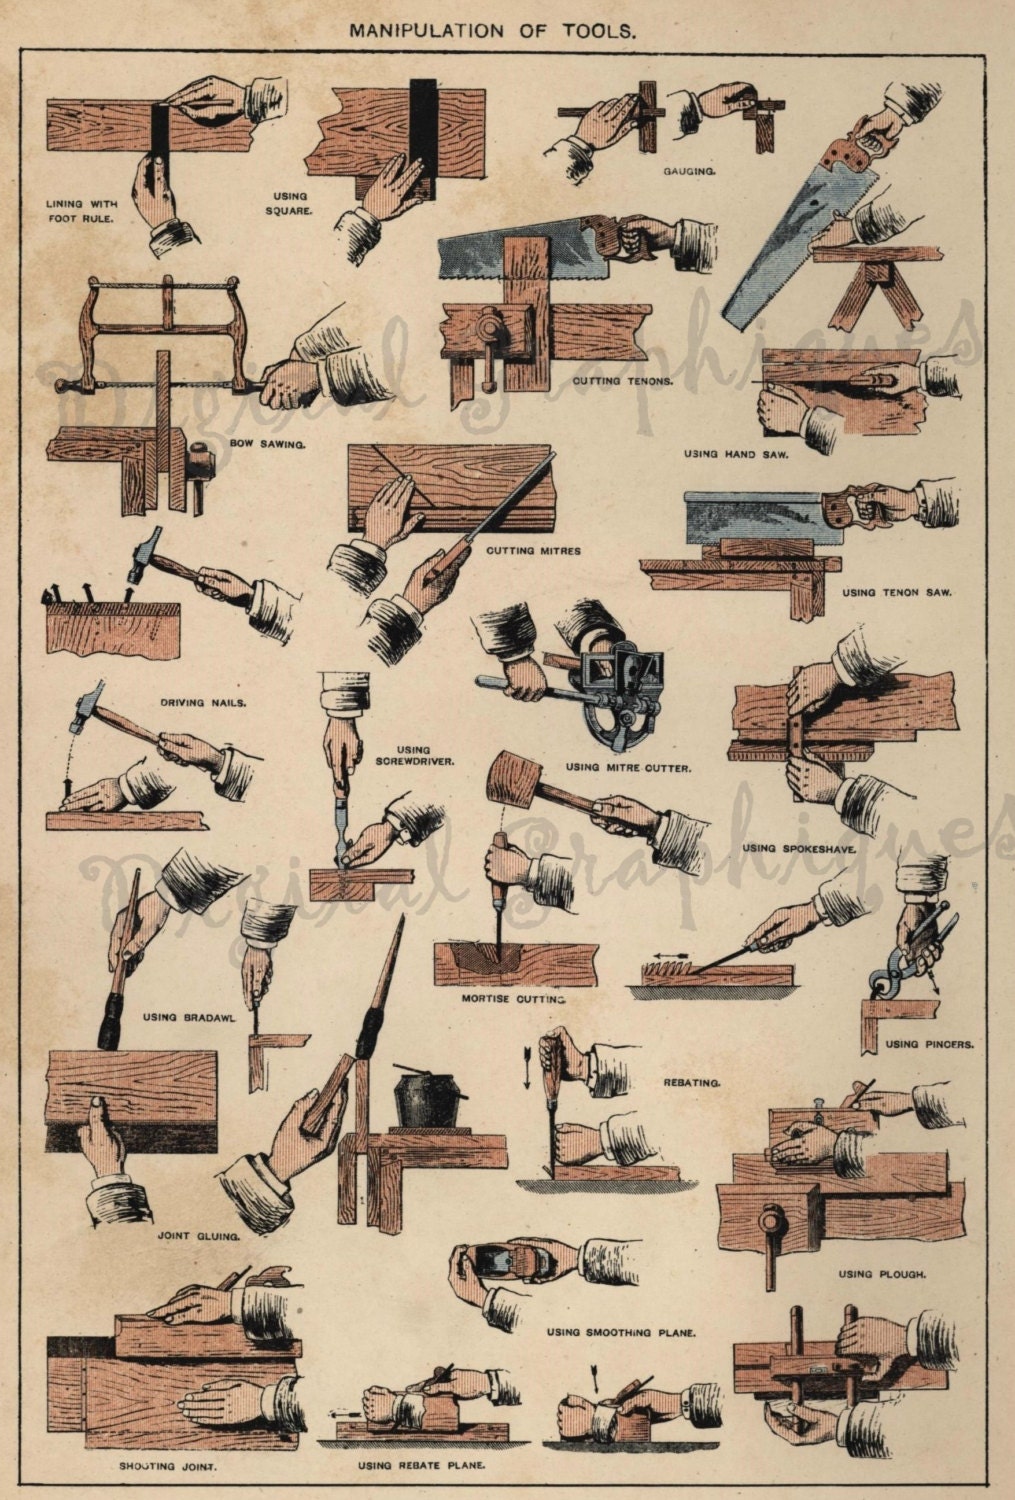 Early 1900 Illustrated Woodworking by DigitalGraphiques on Etsy